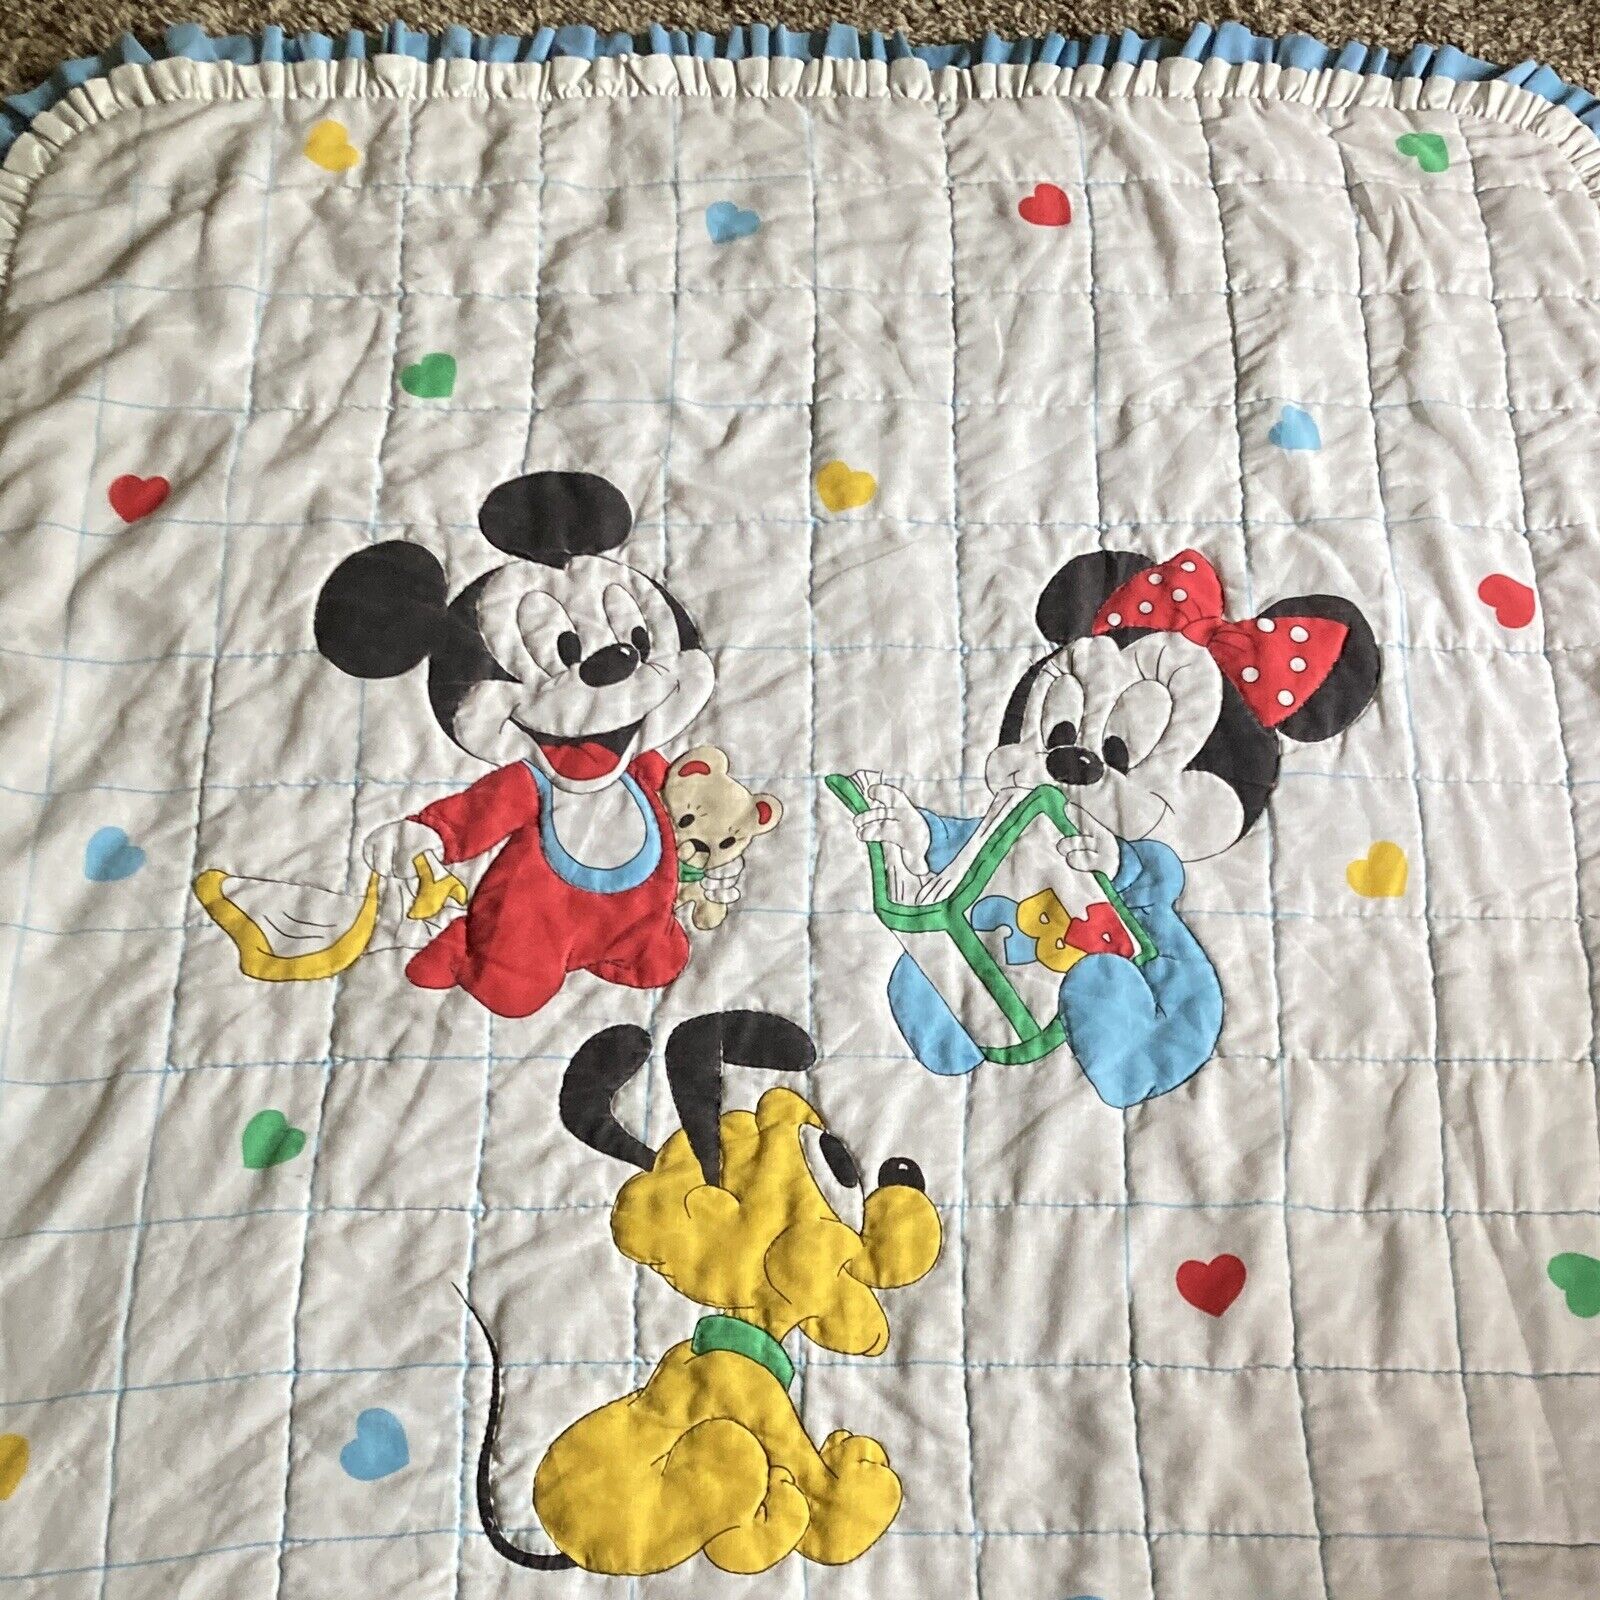 Vintage Disney Baby Mickey Minnie Pluto Hand Stitched Quilt 46 Inches 37 Inches